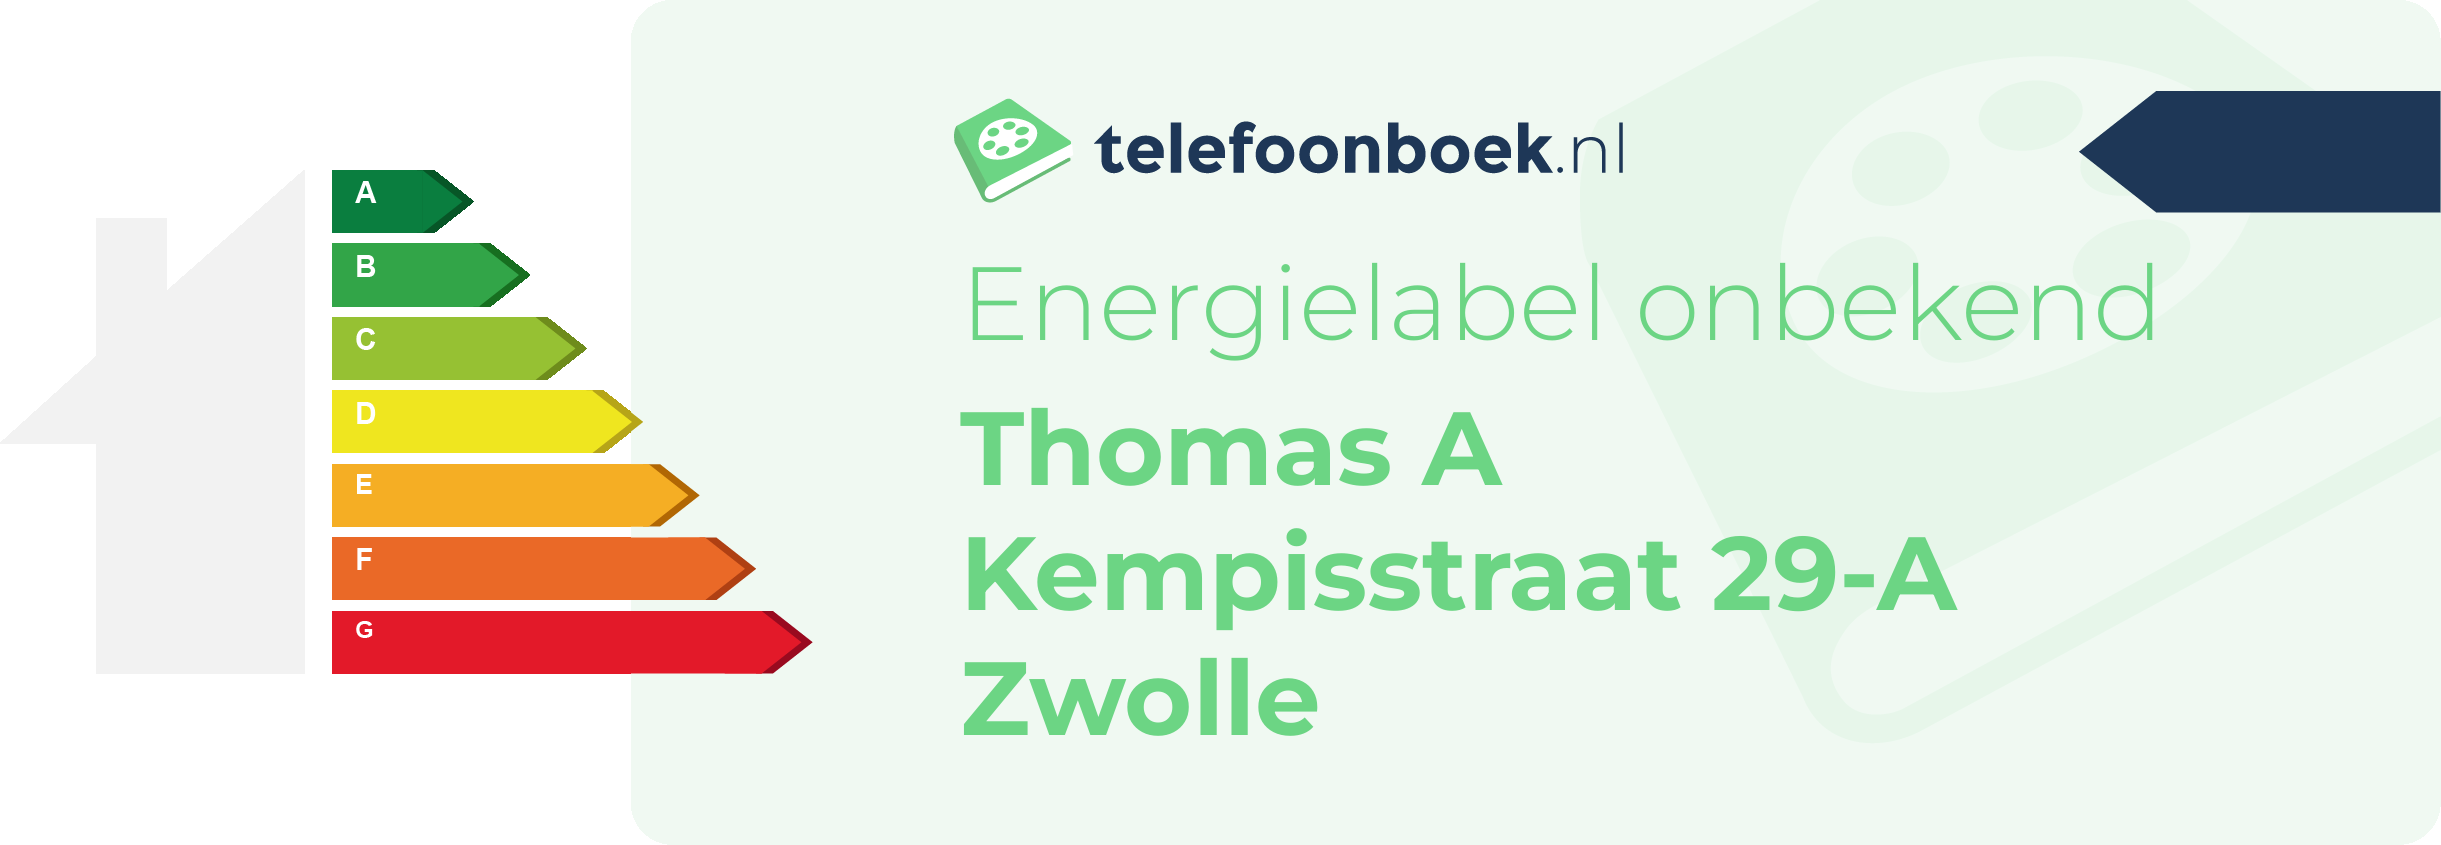 Energielabel Thomas A Kempisstraat 29-A Zwolle